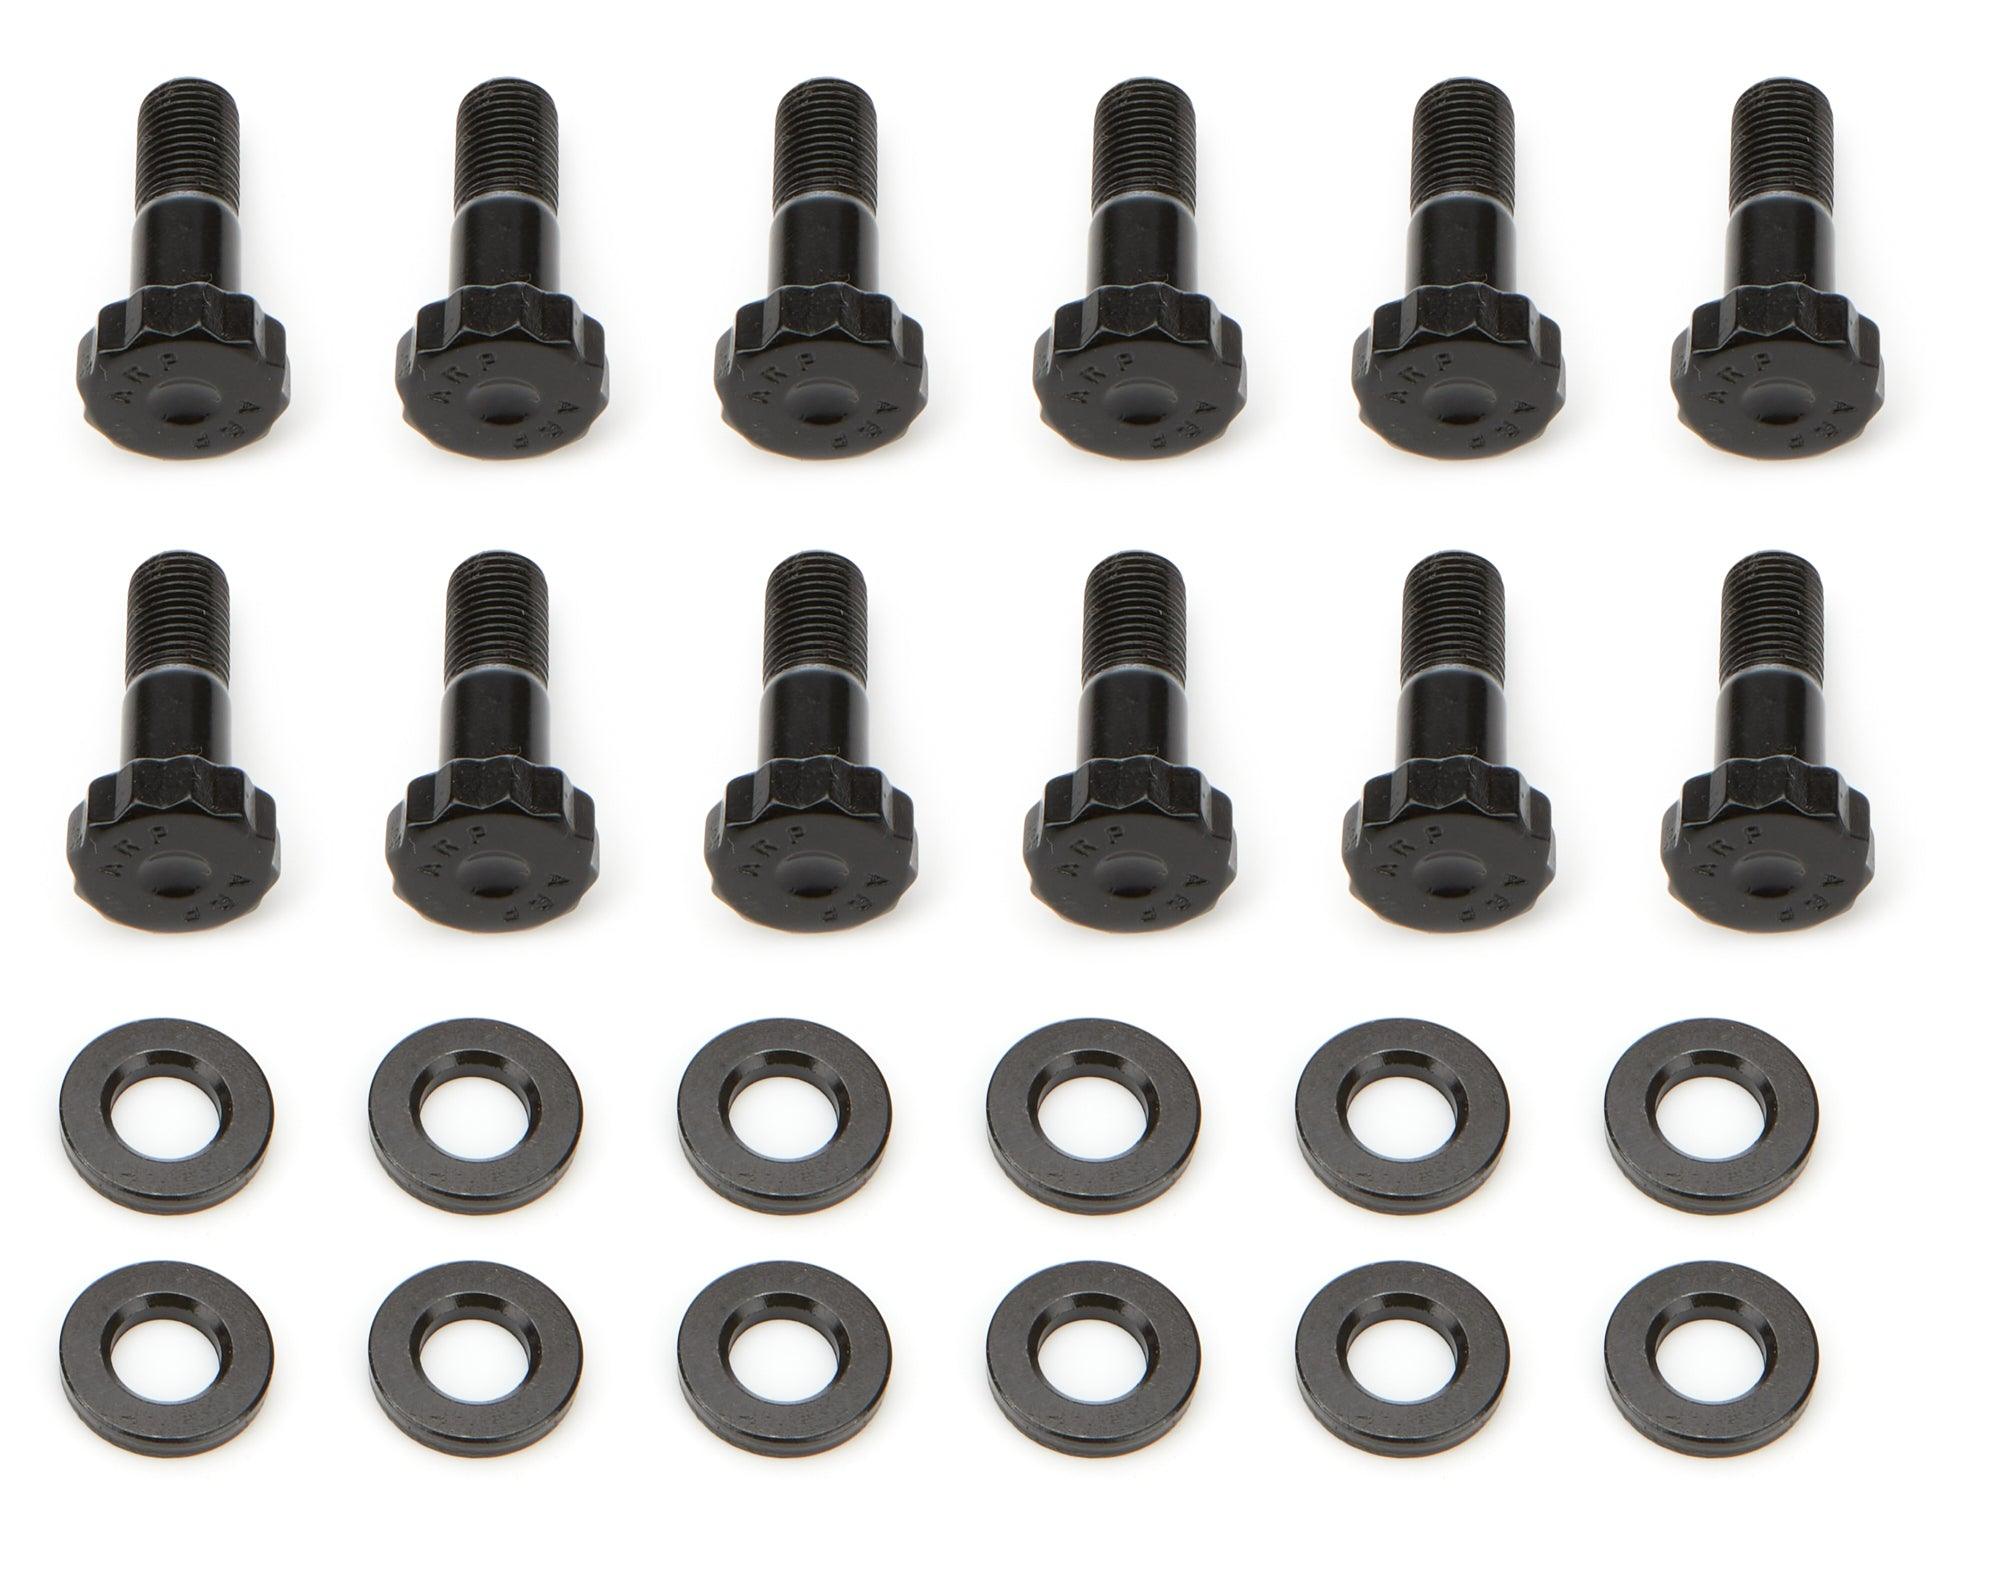 Bolt Kit-Thred. Ring Gea - Burlile Performance Products